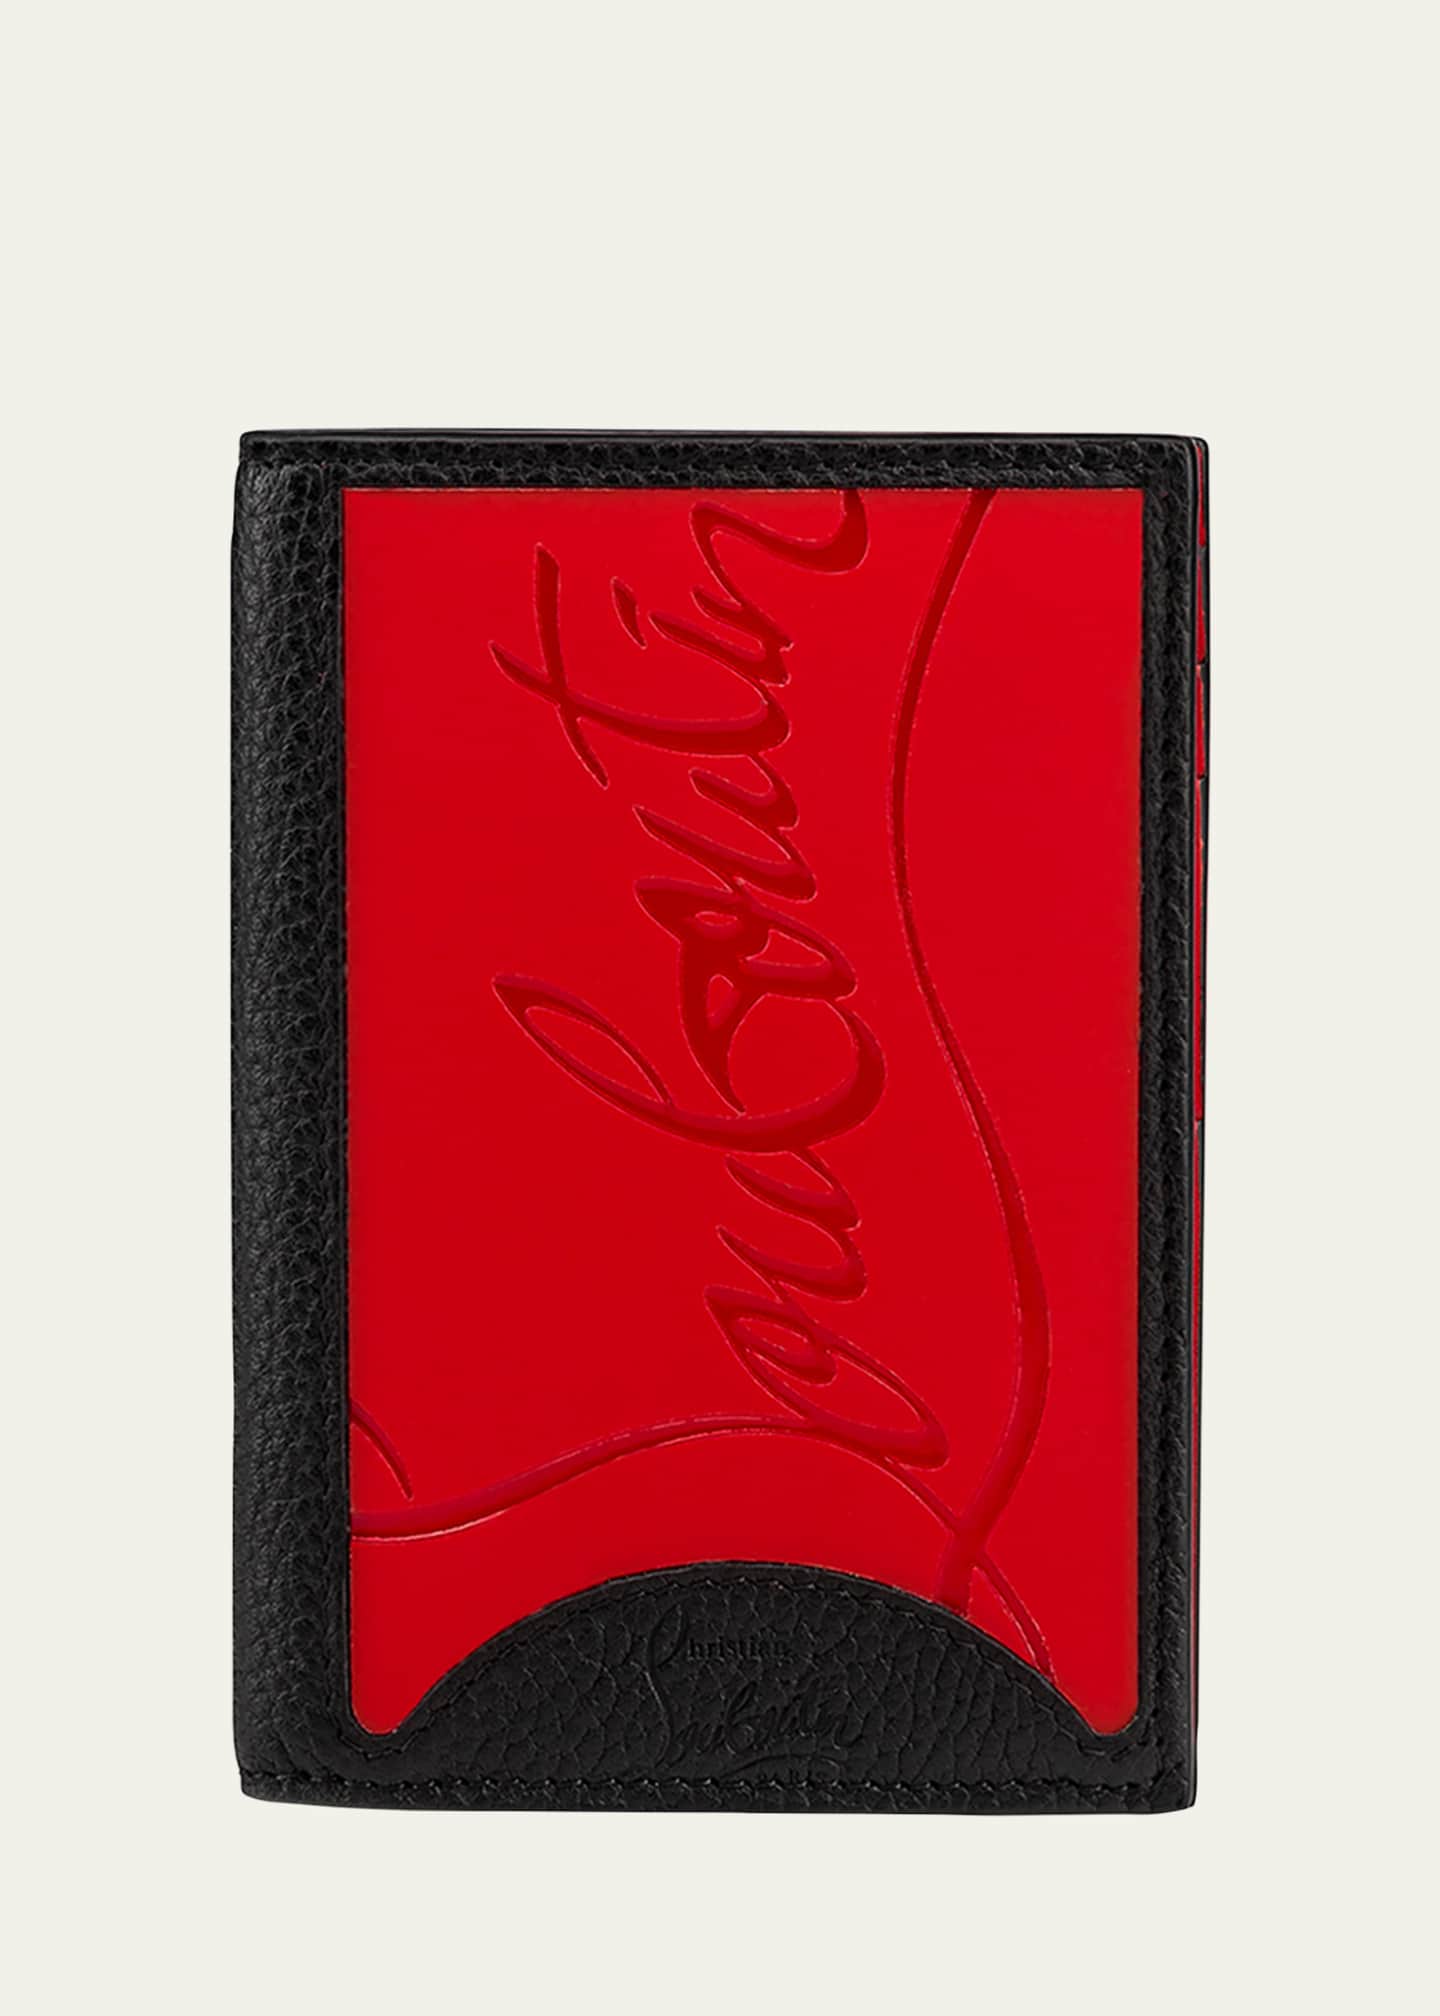 Christian Louboutin Men's Empire Two-Tone Leather Wallet Image 1 of 5